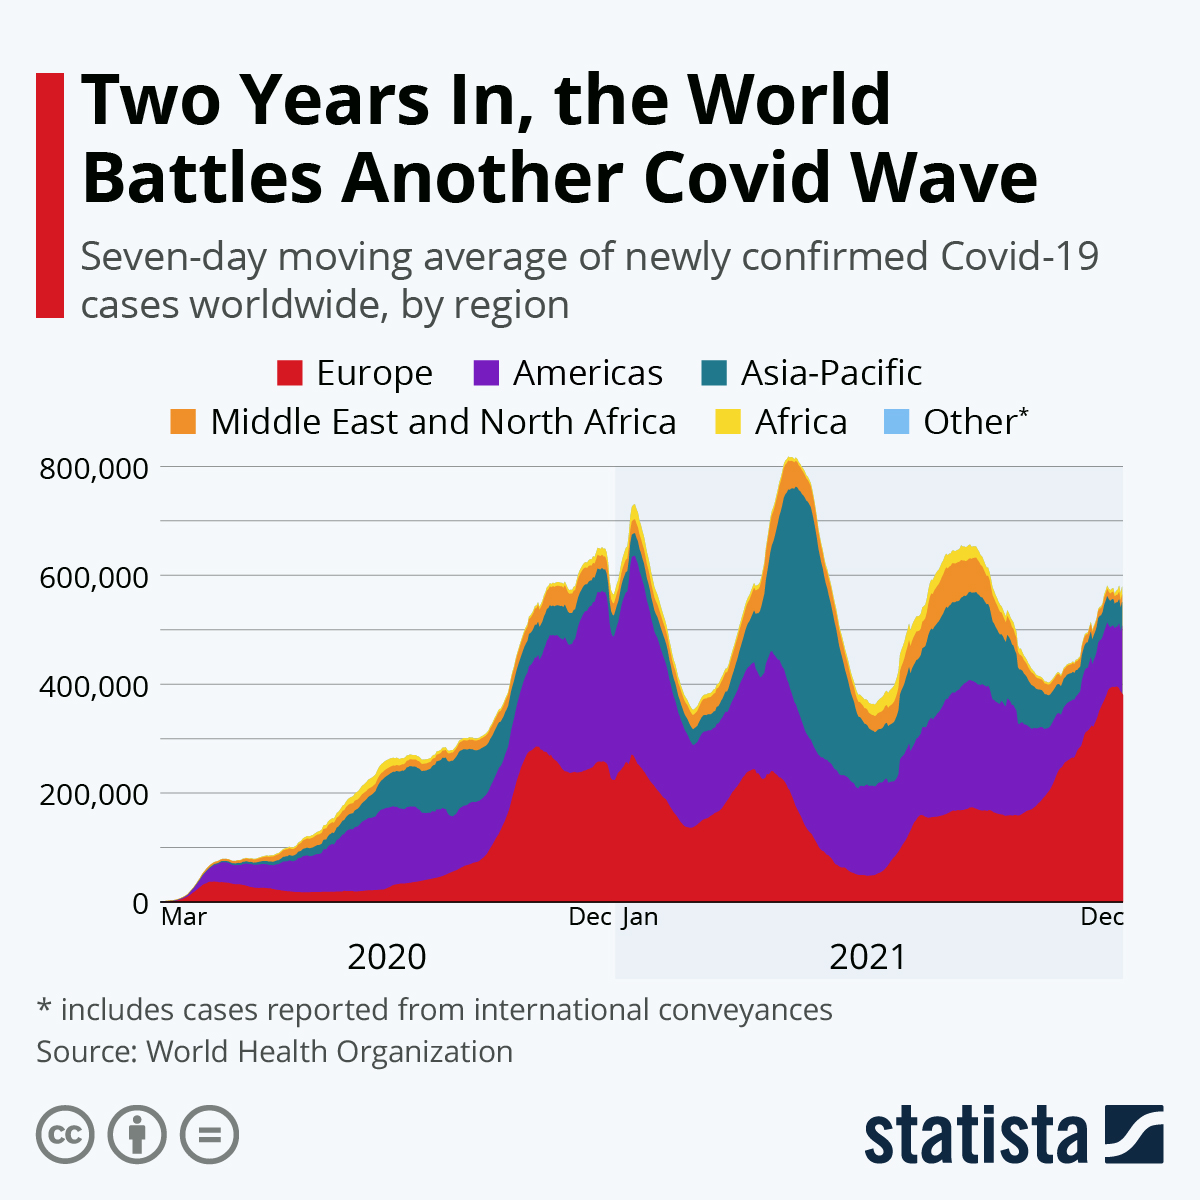 Two Years In, the World Battles Another Covid Wave